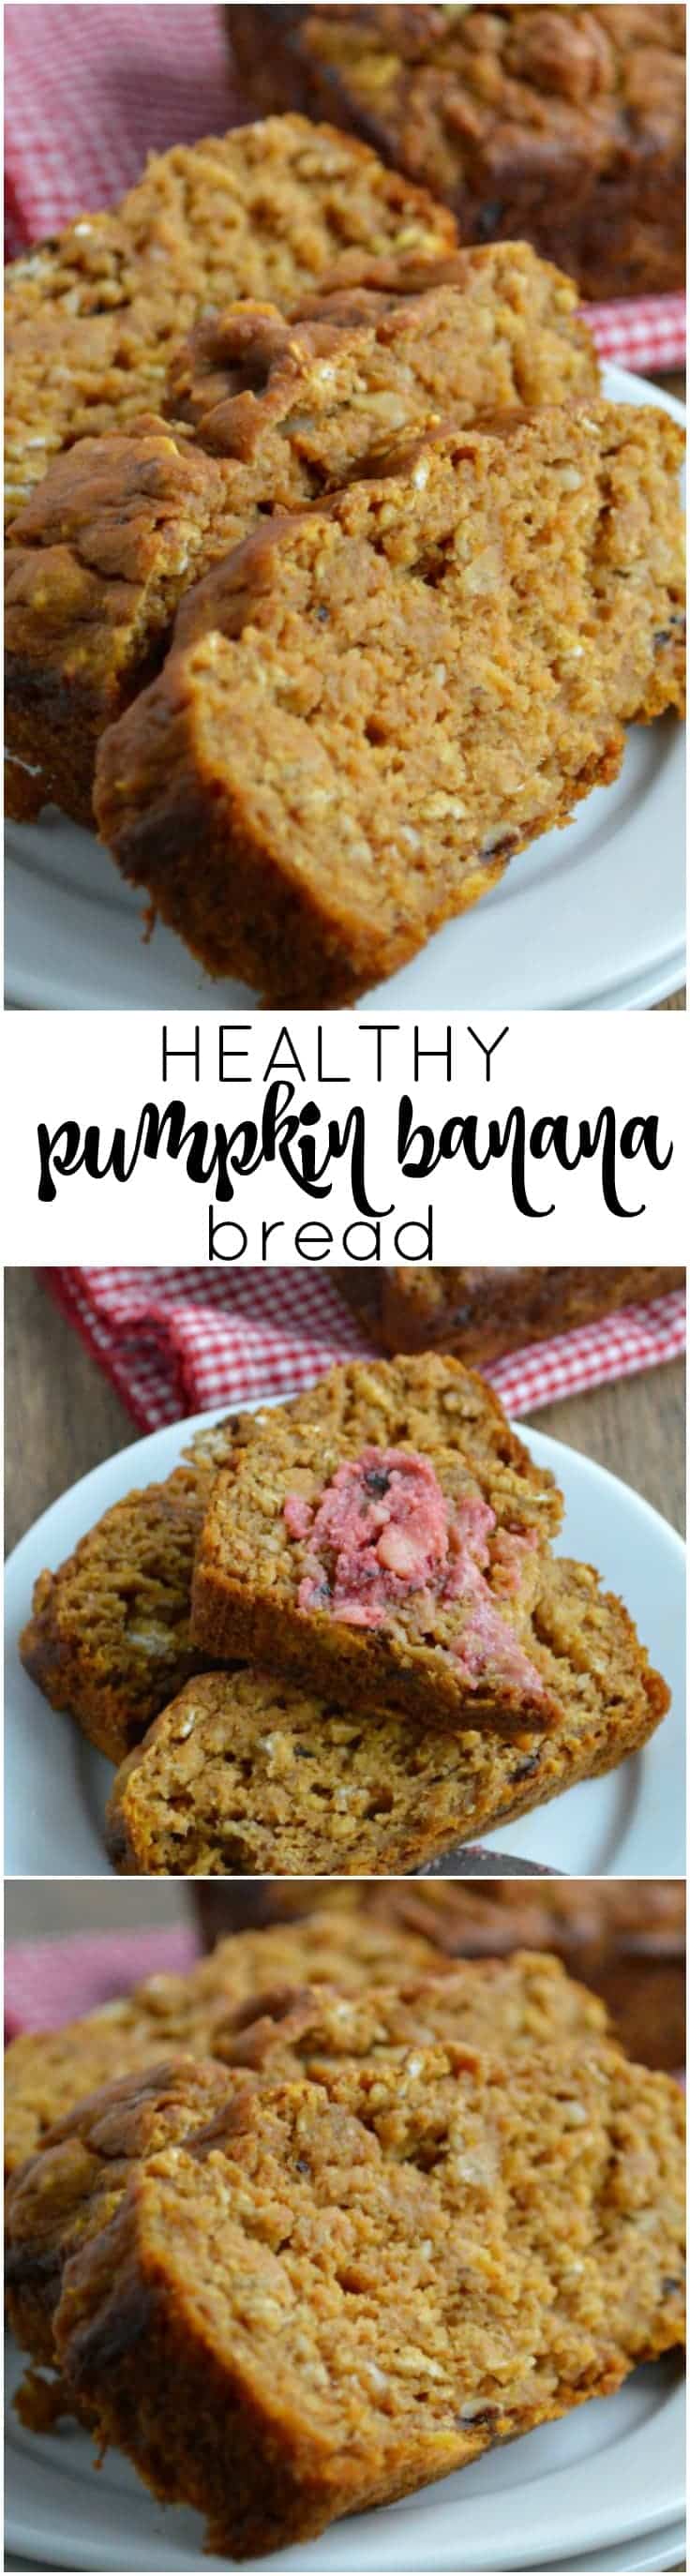 This moist quick bread recipe uses applesauce, bananas, and pumpkin in place of the butter and is loaded with fall flavor. Only 1/2 cup brown sugar in the whole recipe!